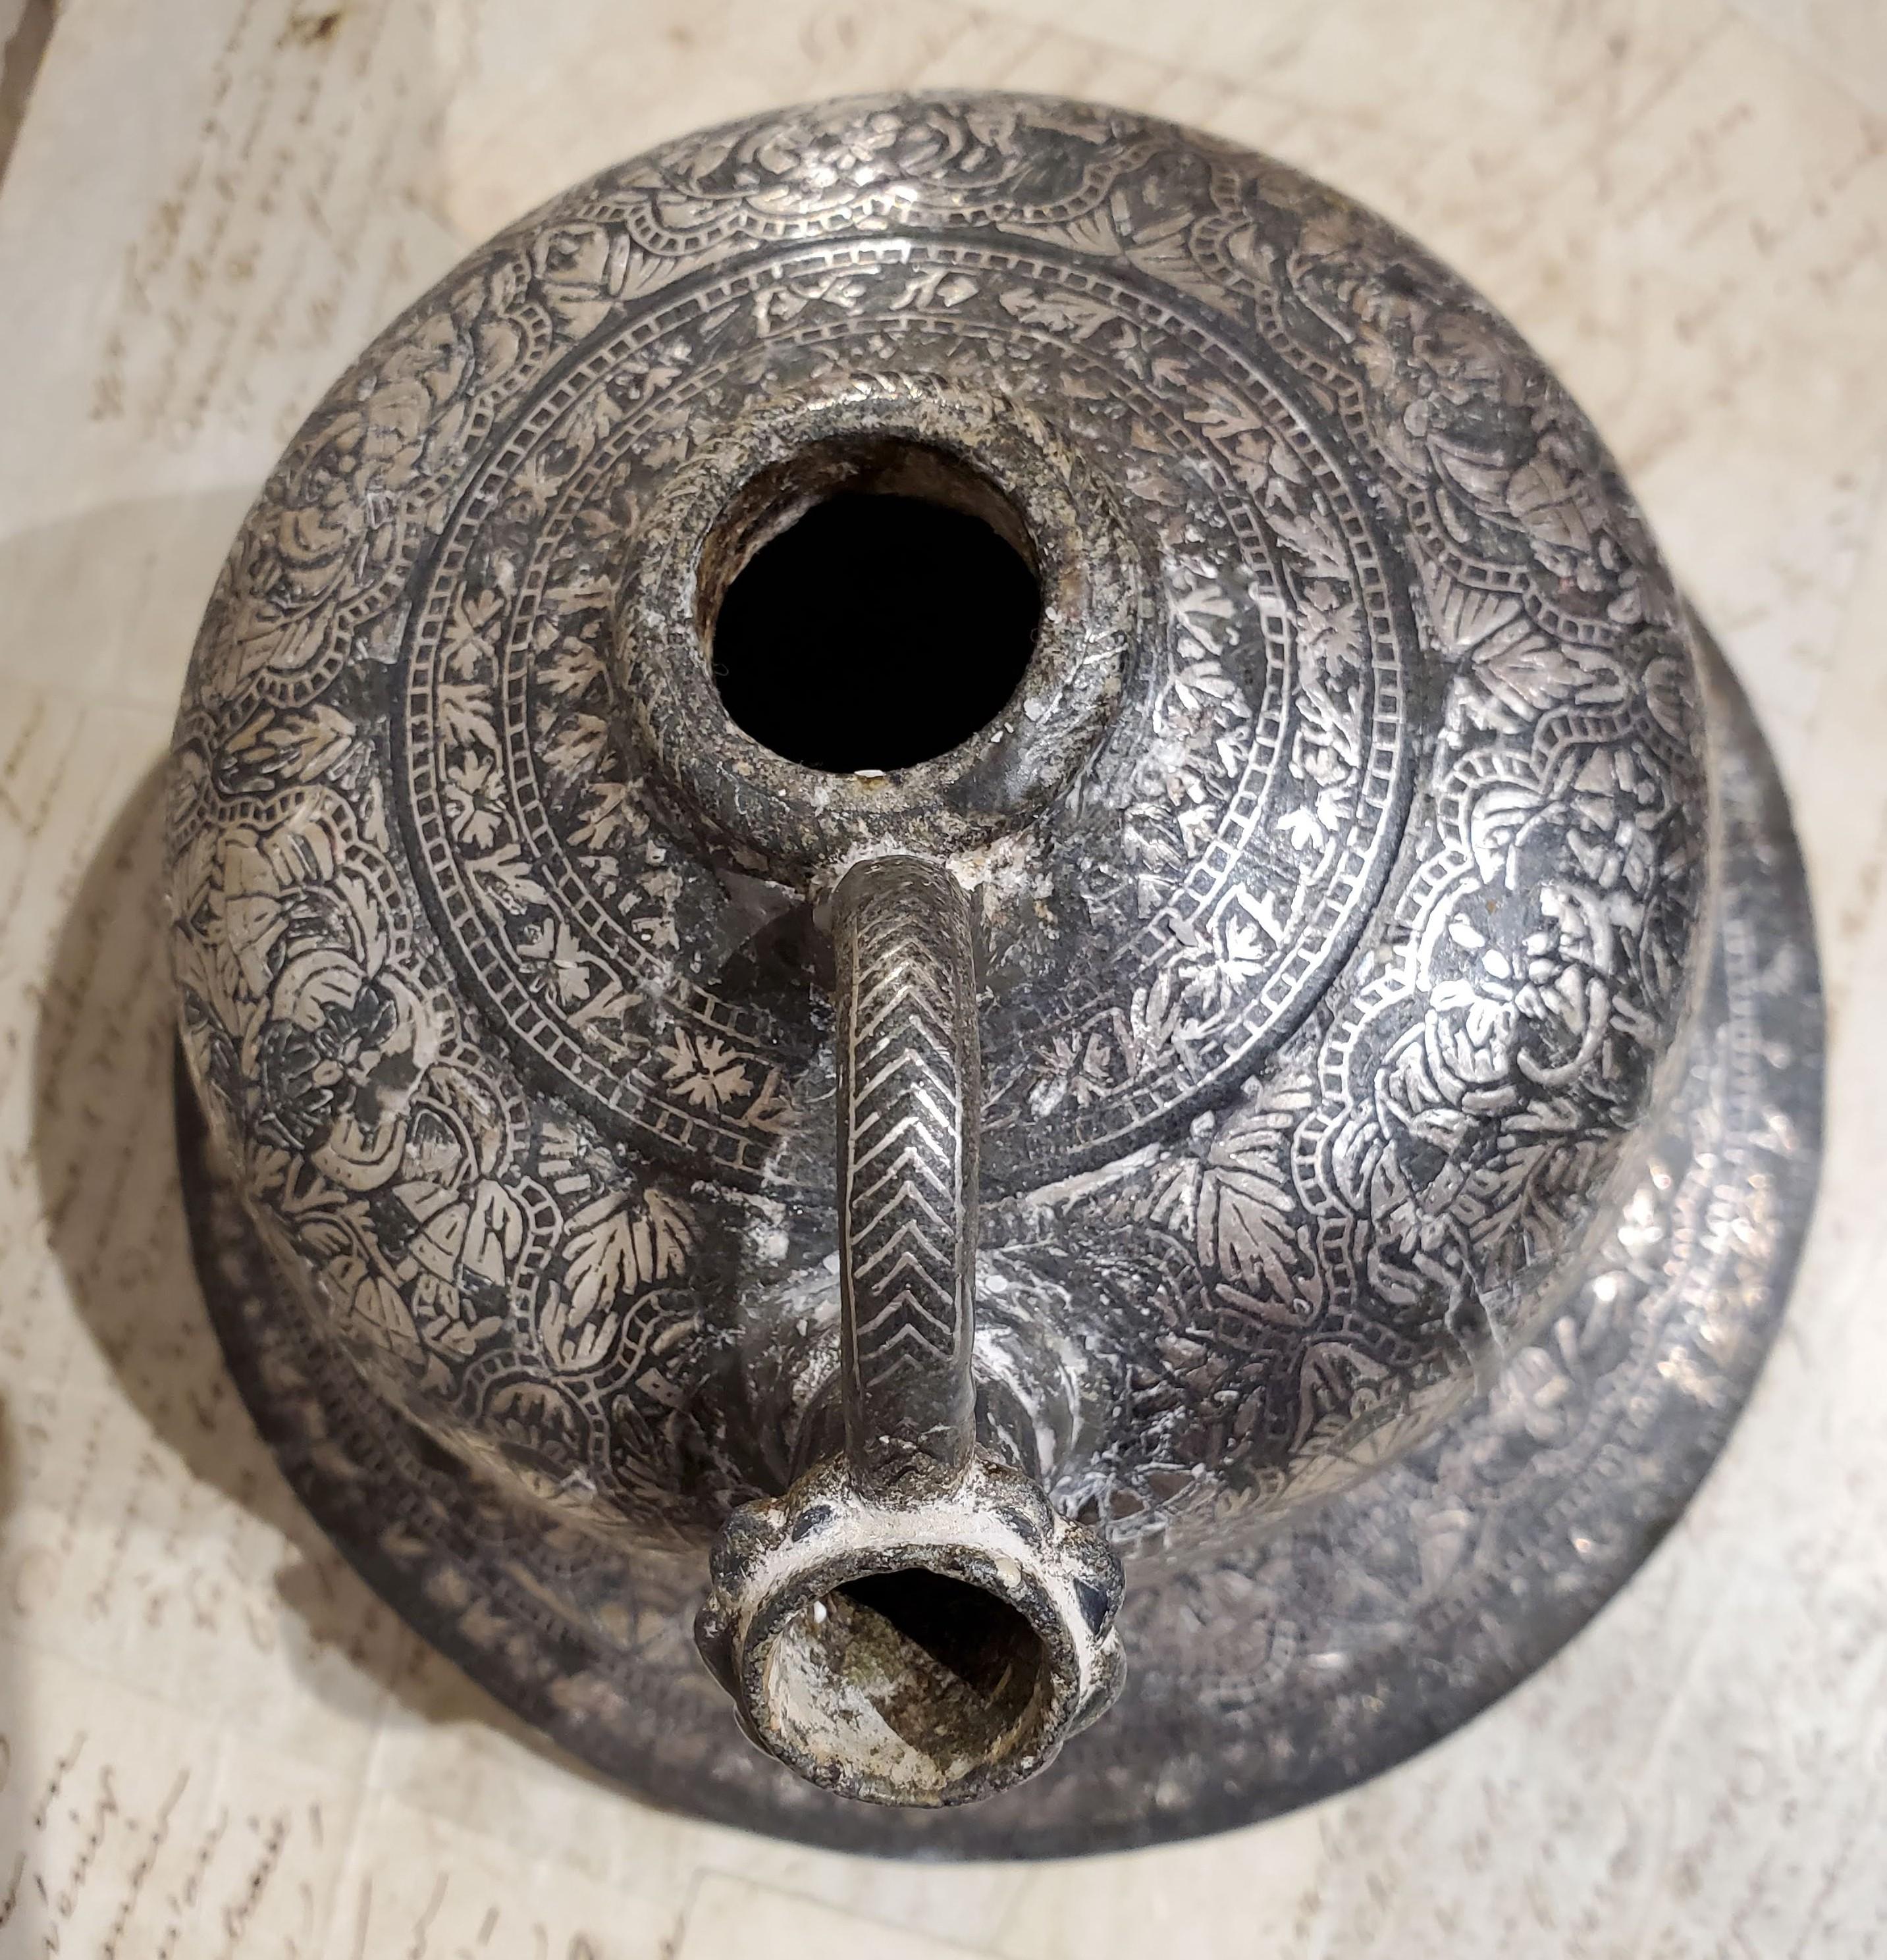 This 18th century Indian ”Bidriware” hookah base is beautifully intricate. Makes a statement on its own or modernize it and use as a candleholder. Bidri is a metal working technique unique to India, which involves inlaying fine geometric and floral